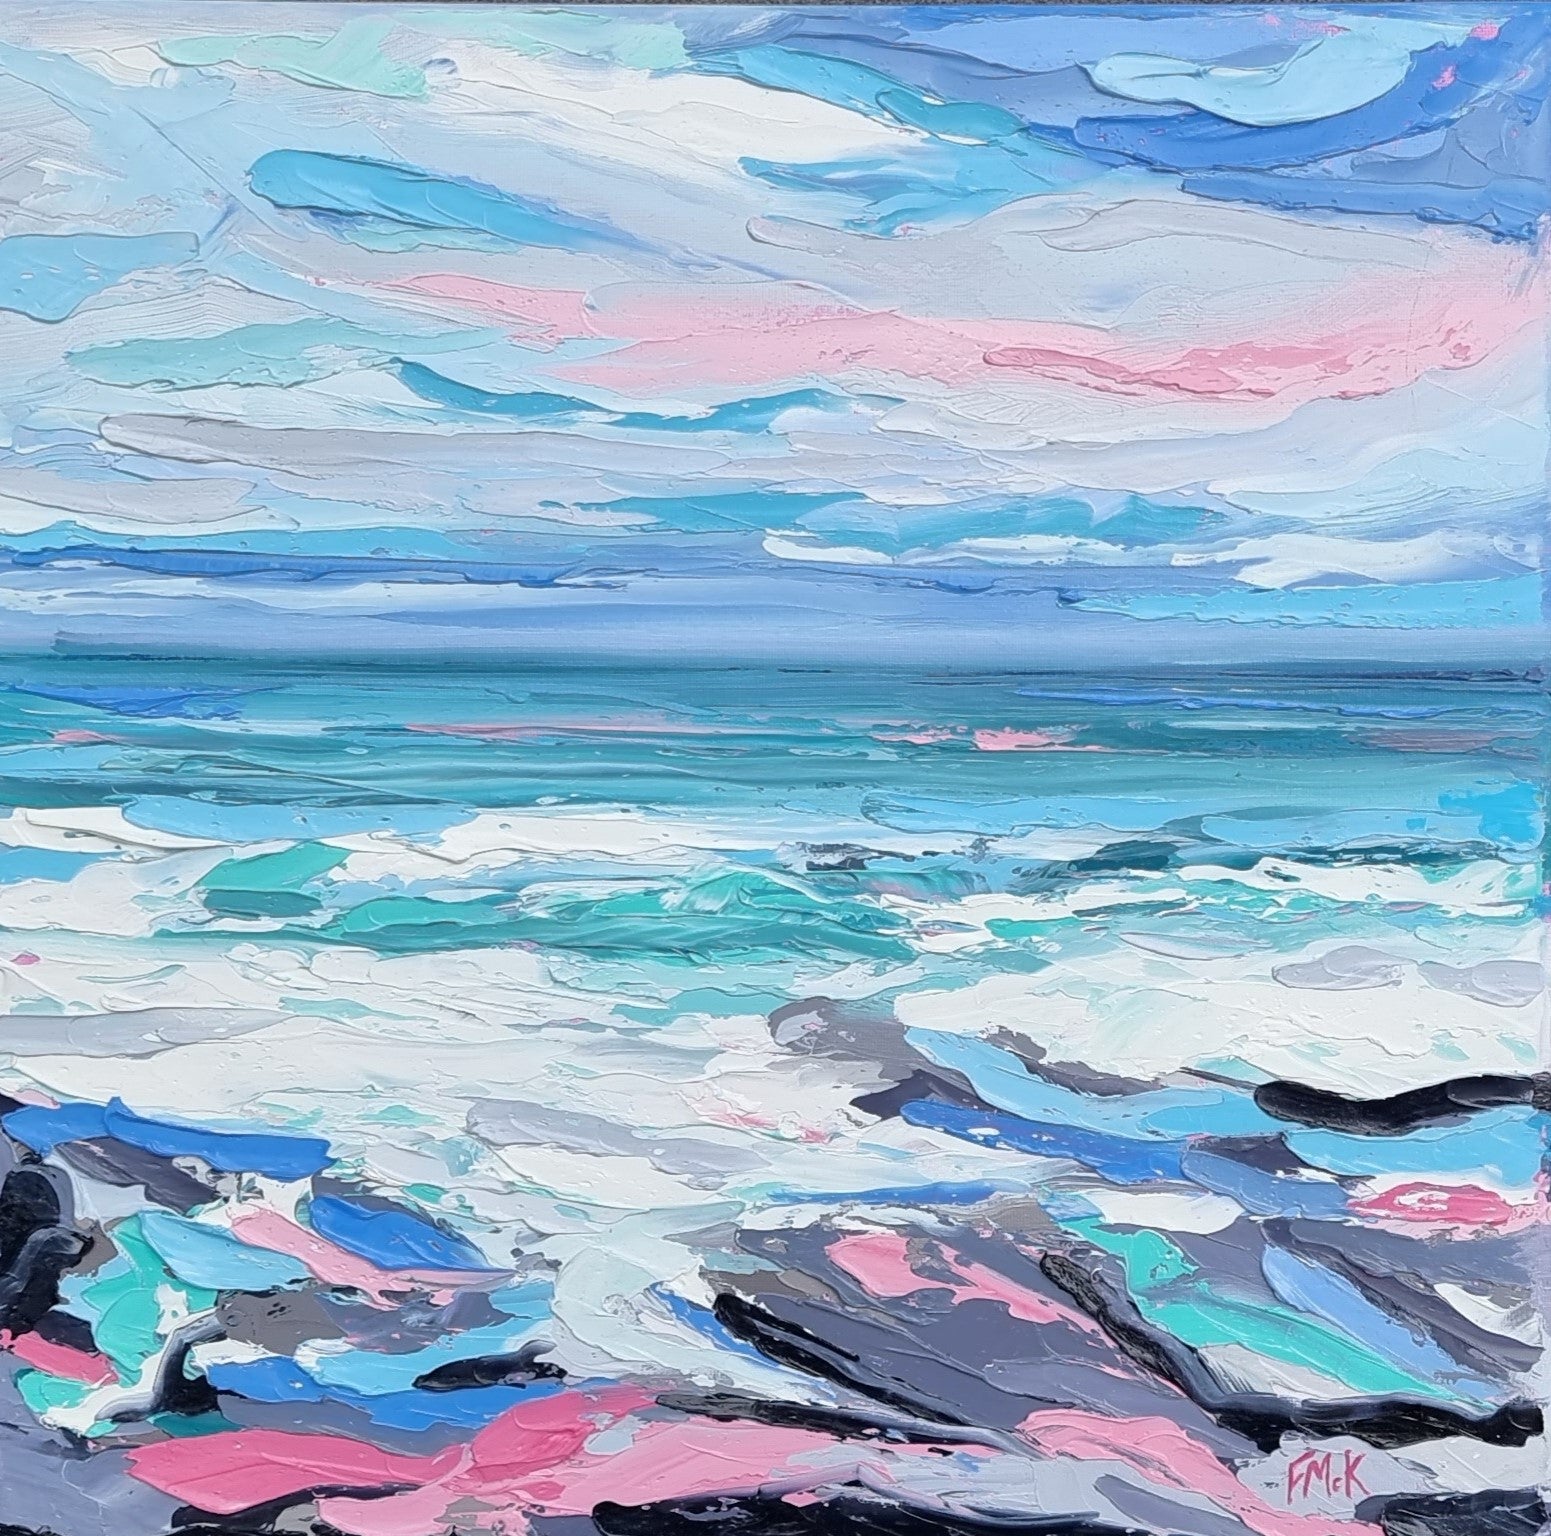 An original oil painting inspired by the south-east coast of Ireland, on the Hook Peninsula in Co. Wexford. This painting encapsulates spending time with the wind on your face and hearing the waves crashing against the rocks. A place where anything is possible - definitely good for the soul.  12" x 12" (30cm x 30cm) on a slim canvas, unframed.